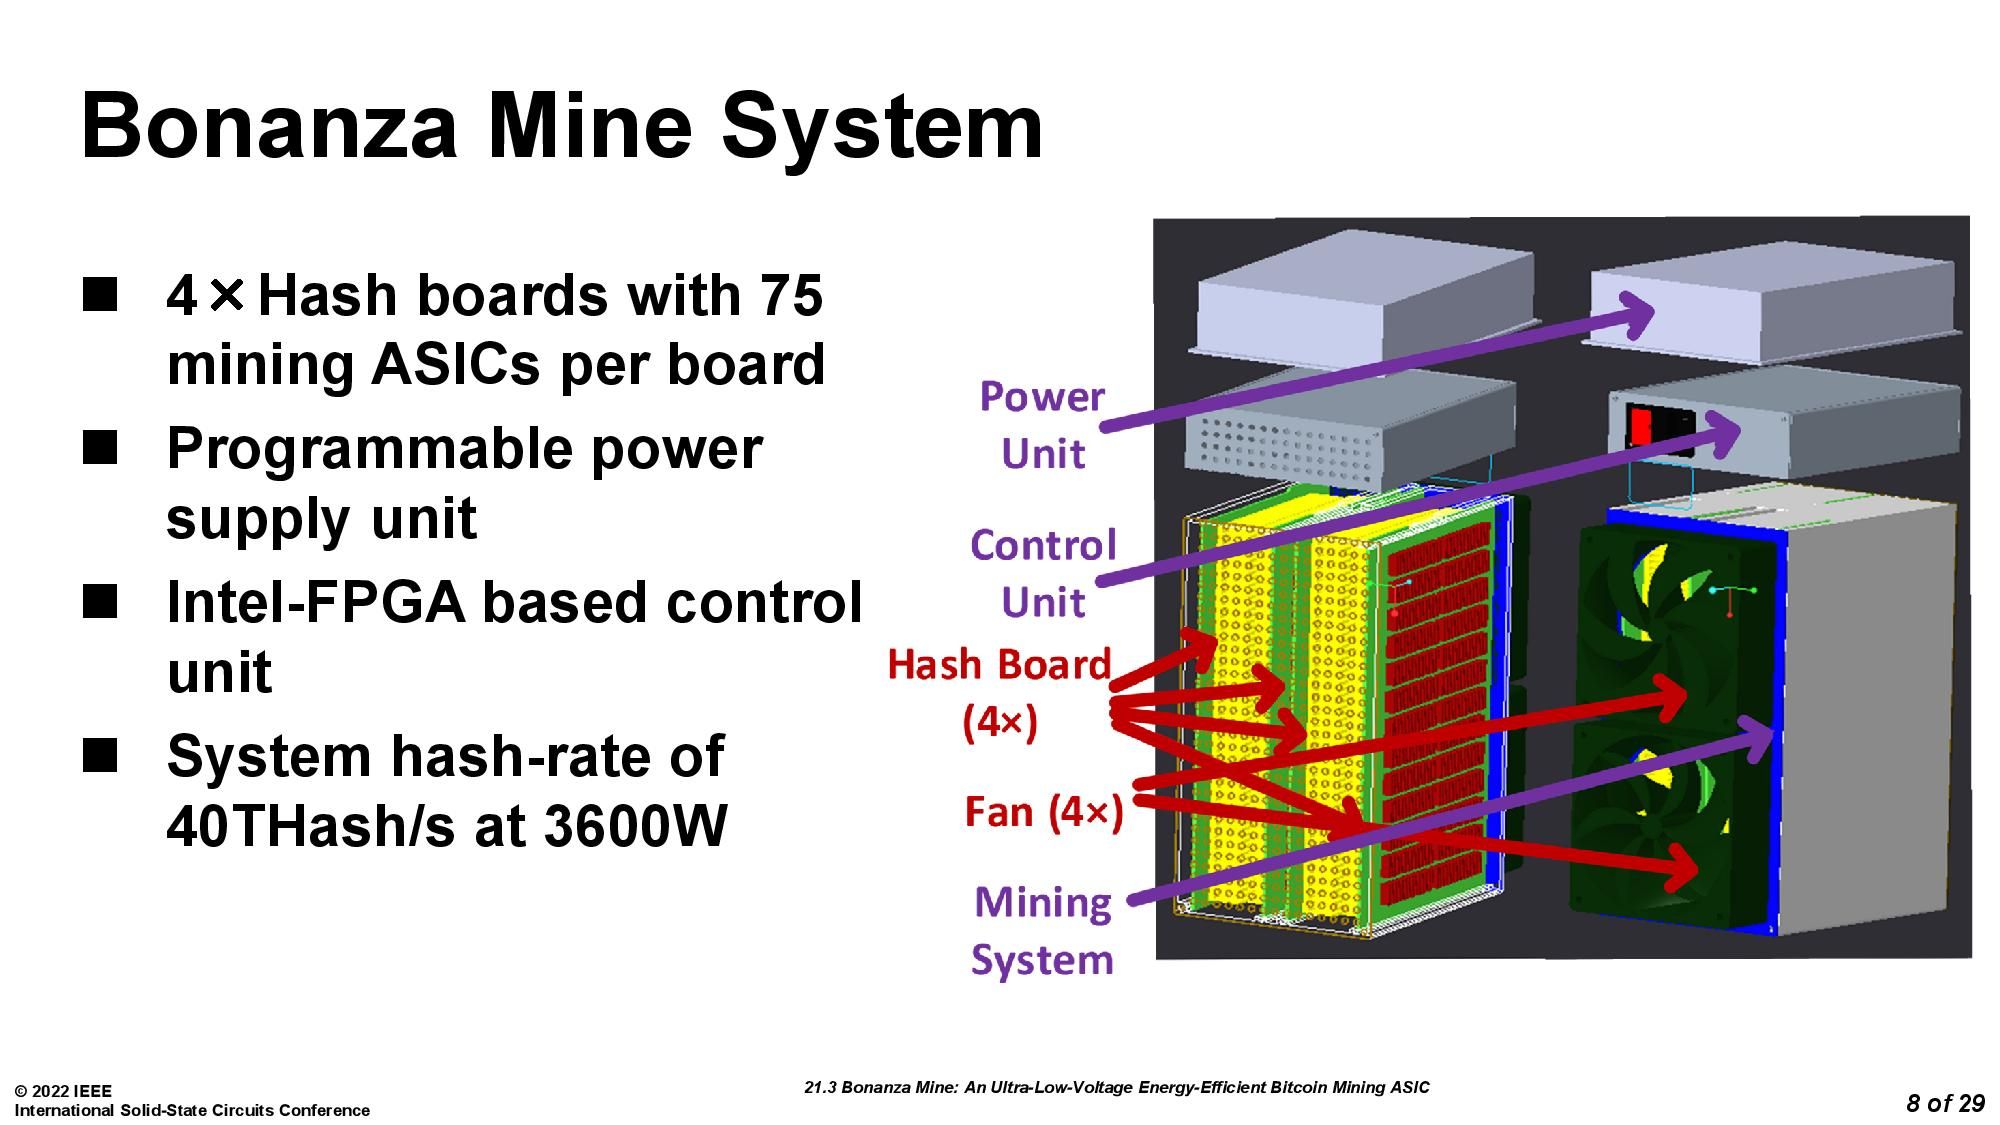 Intel revealed specs of Bonanza Mine ASIC - only 40 Th/s of power